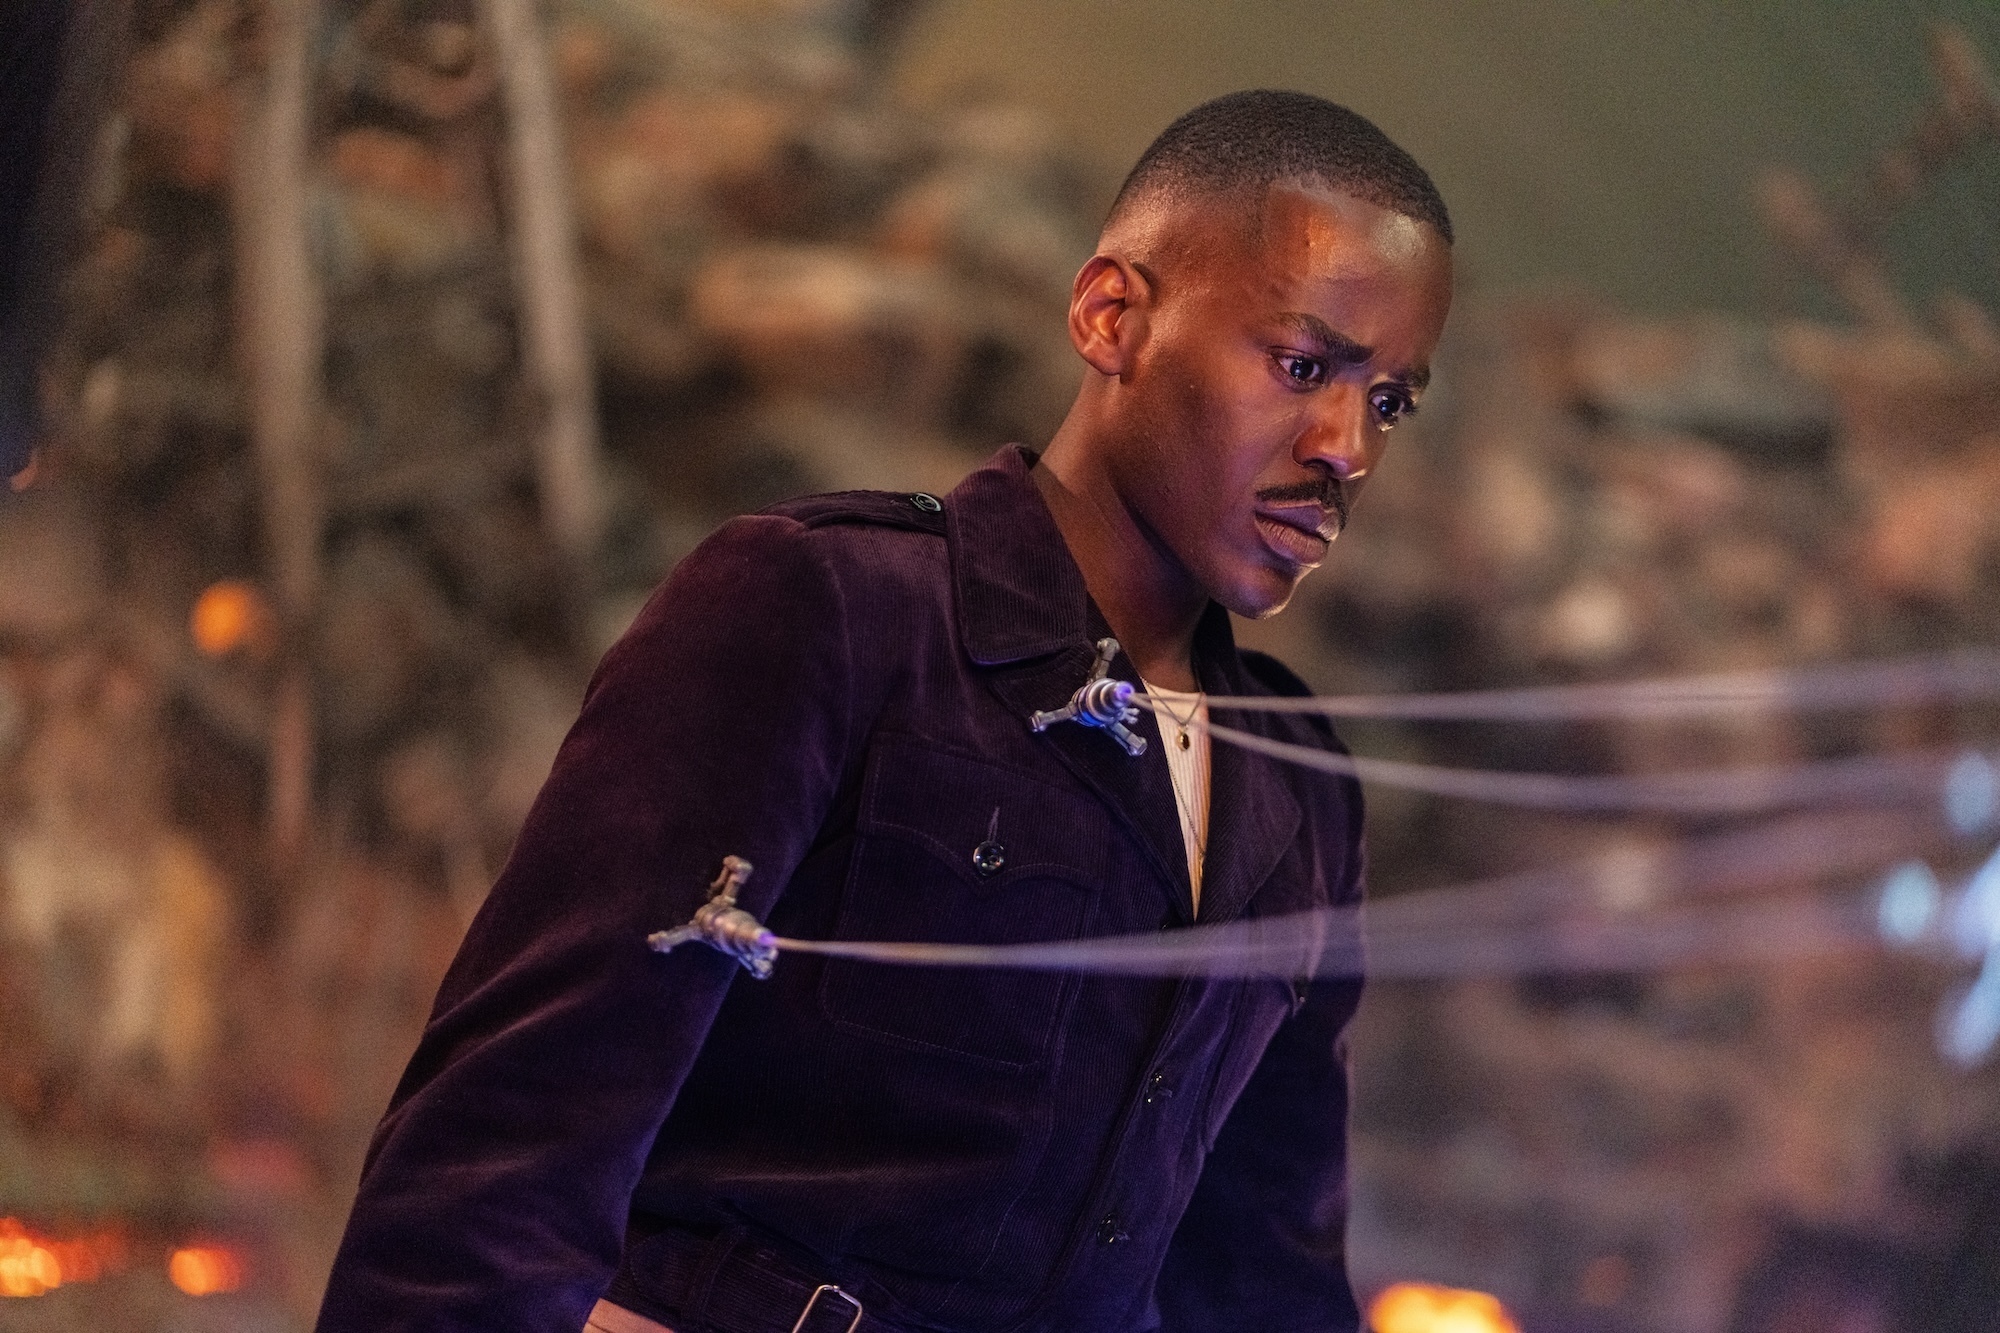 A close-up on the Fifteenth Doctor (Ncuti Gatwa) as he stands very still with cables attached to him in the episode “Boom.”